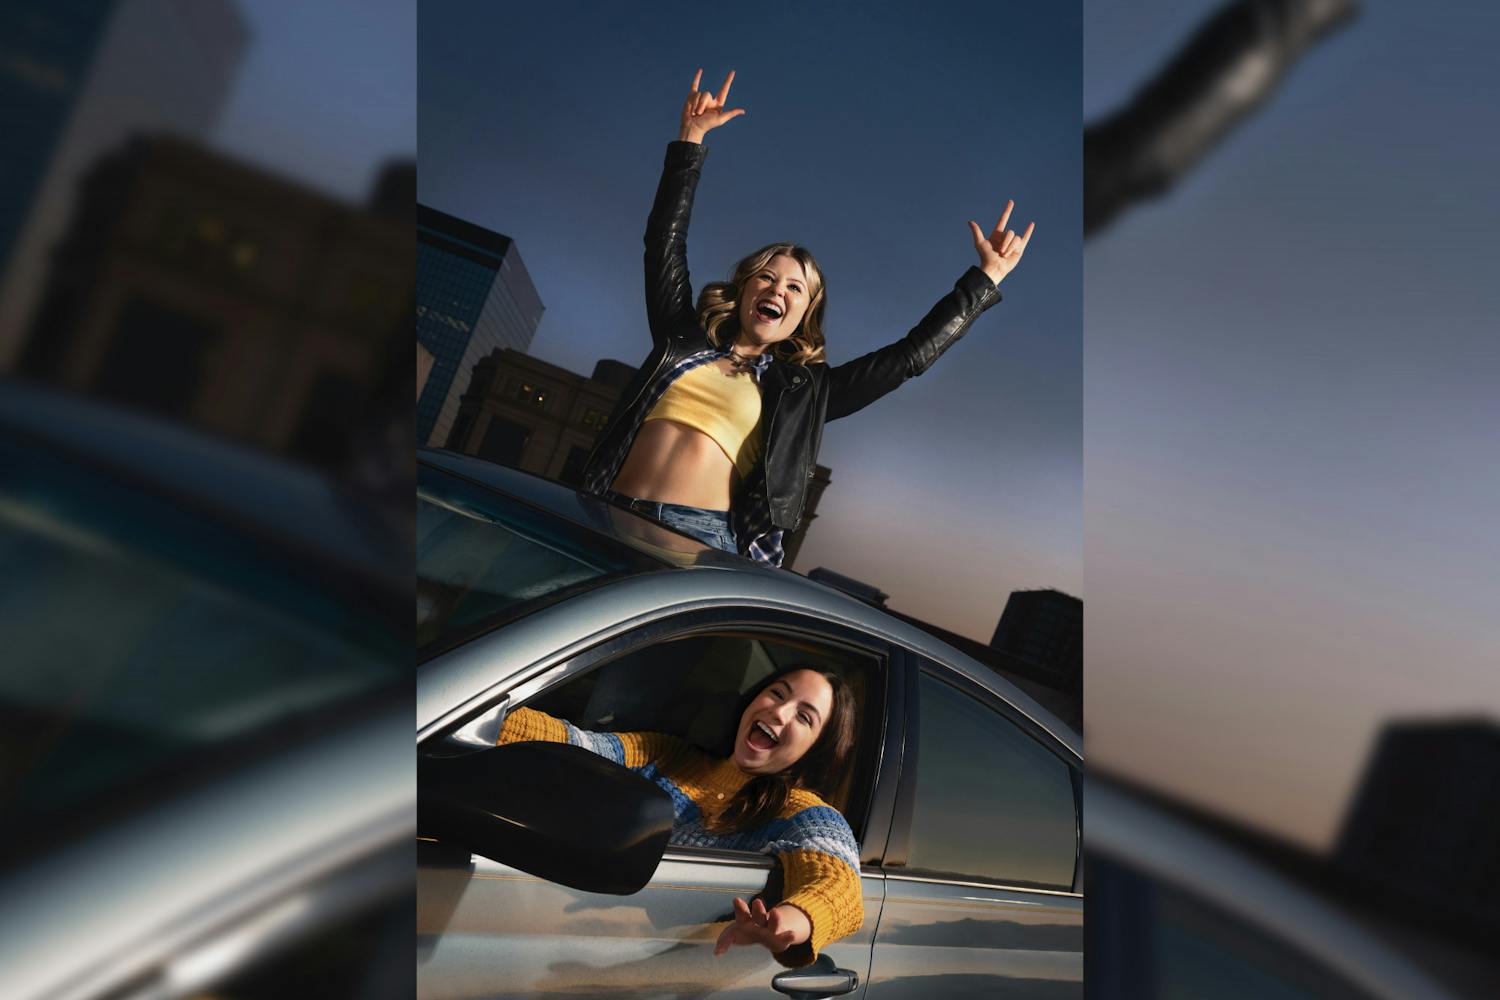 A promotional picture for "The Mad Ones" with performers Elise Heffner (top) and Lily Smith (bottom) driving around Columbia. "The Mad Ones" will be performed at Trustus Theatre every night from Feb. 24 to March 18 at 8 p.m., except for the performance on March 2, which will take place at 7 p.m.